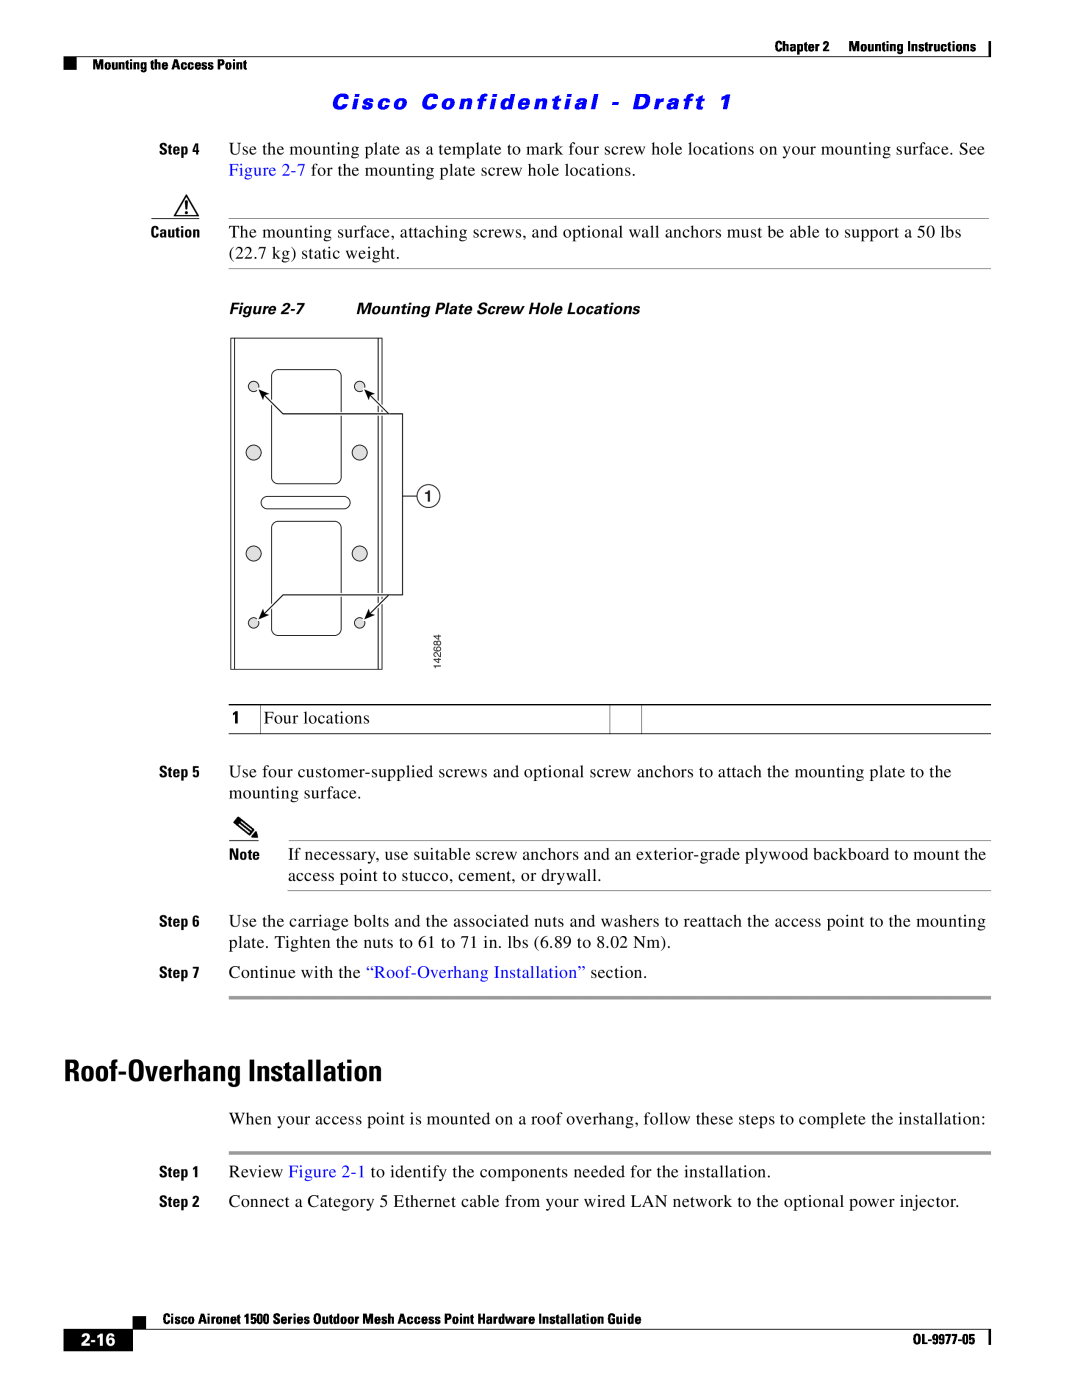 Cisco Systems 1500 Series manual Continue with the “Roof-Overhang Installation” section, 2-16 